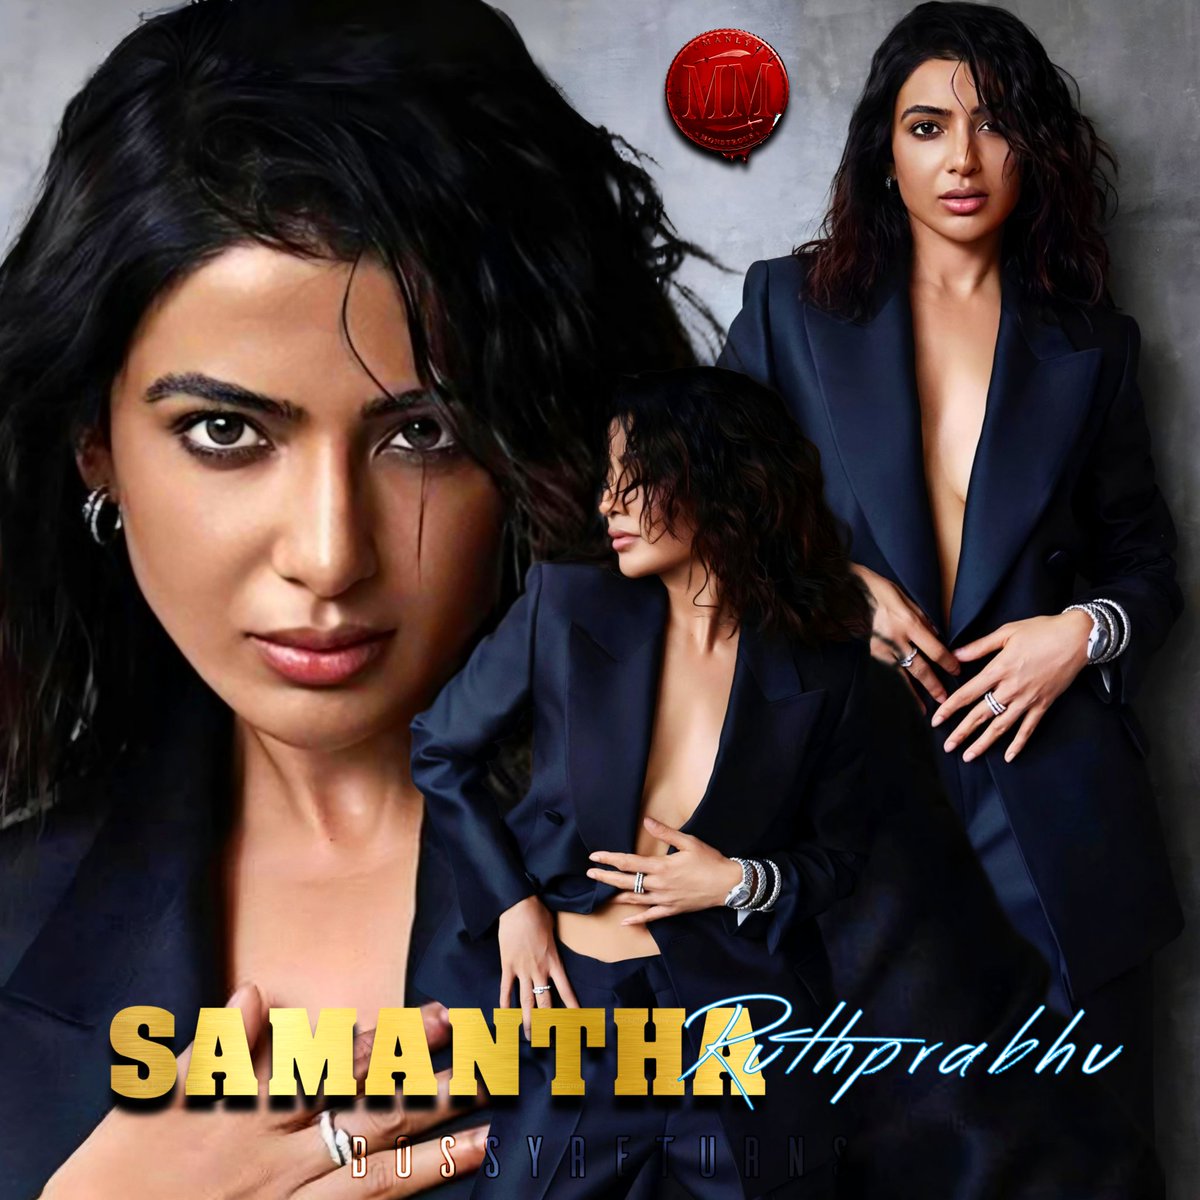 Bossy Returns 😎 Ruthless Emperor of Youngster's Souls #Samantha #samantharuthprabhu #samanthahot #Manlymonstrous 😈